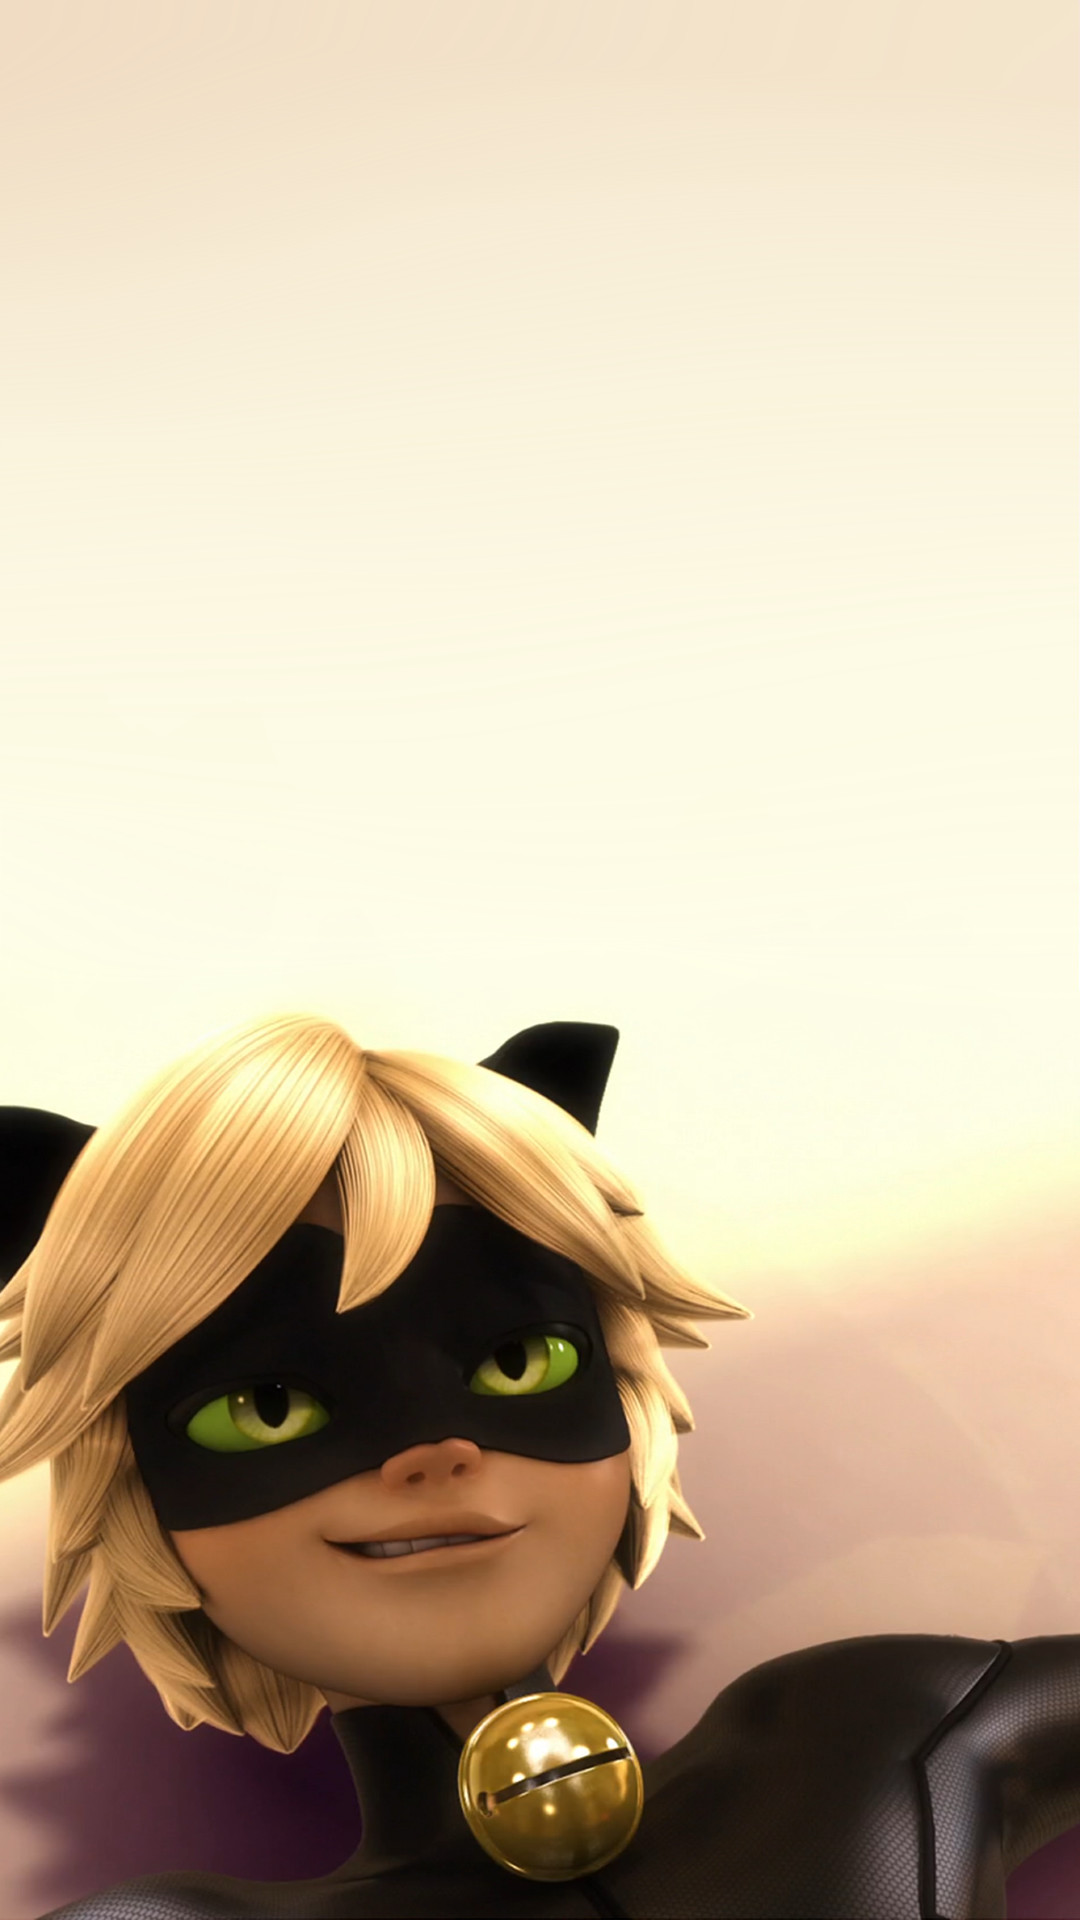 1080x1920 Random Miraculous Ladybug phone wallpapers (I got a bit carried away with  the last two haha)